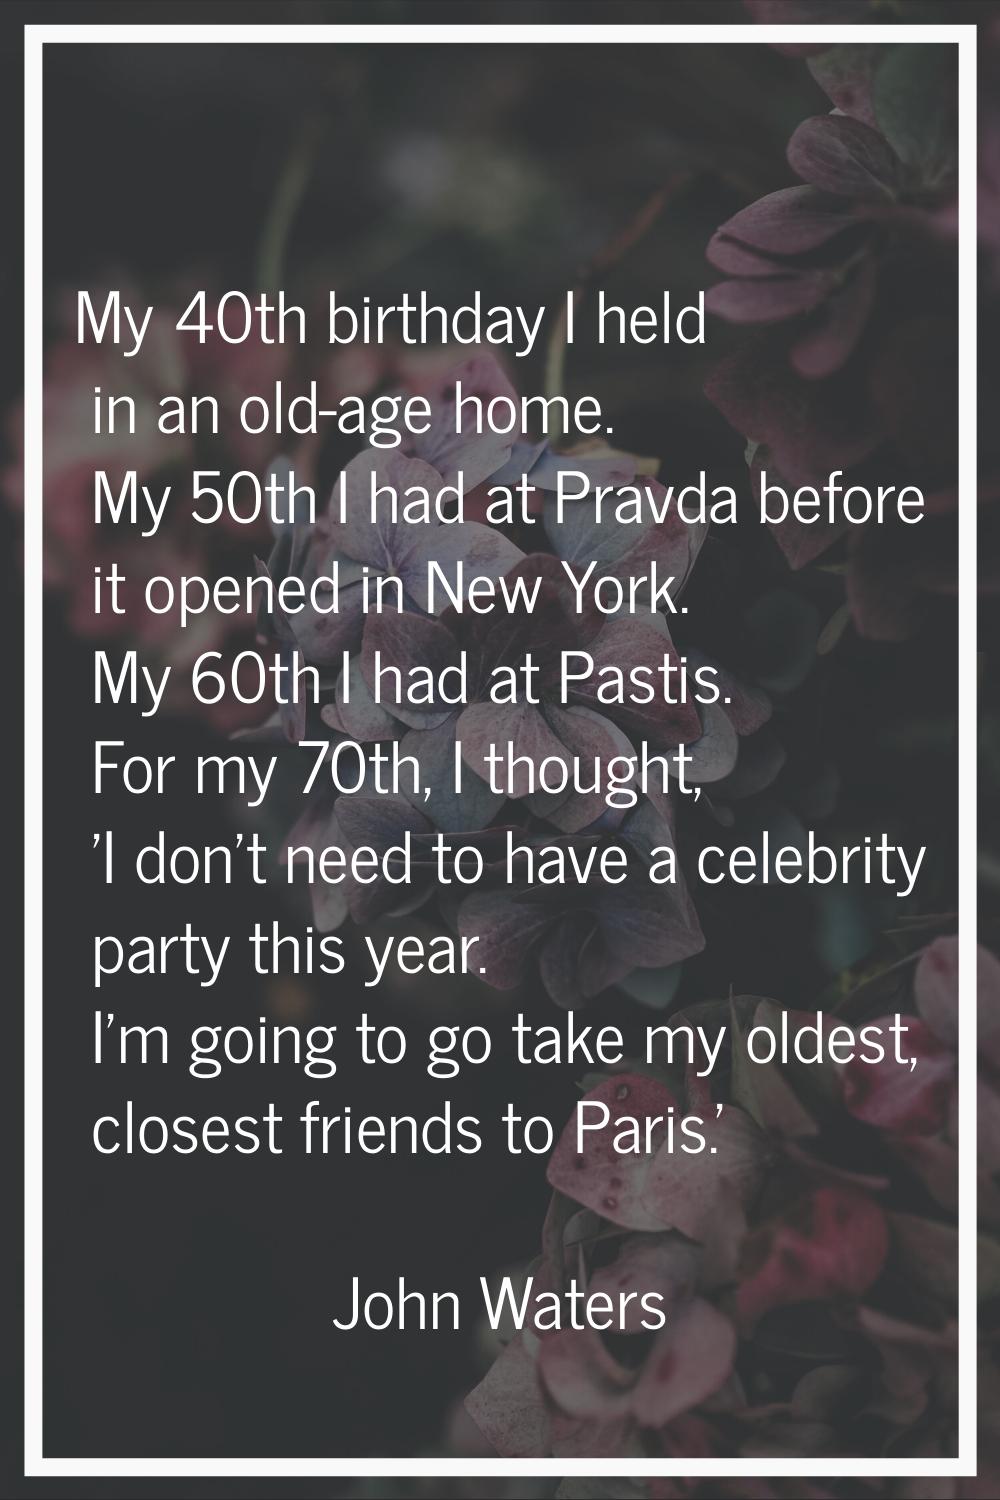 My 40th birthday I held in an old-age home. My 50th I had at Pravda before it opened in New York. M